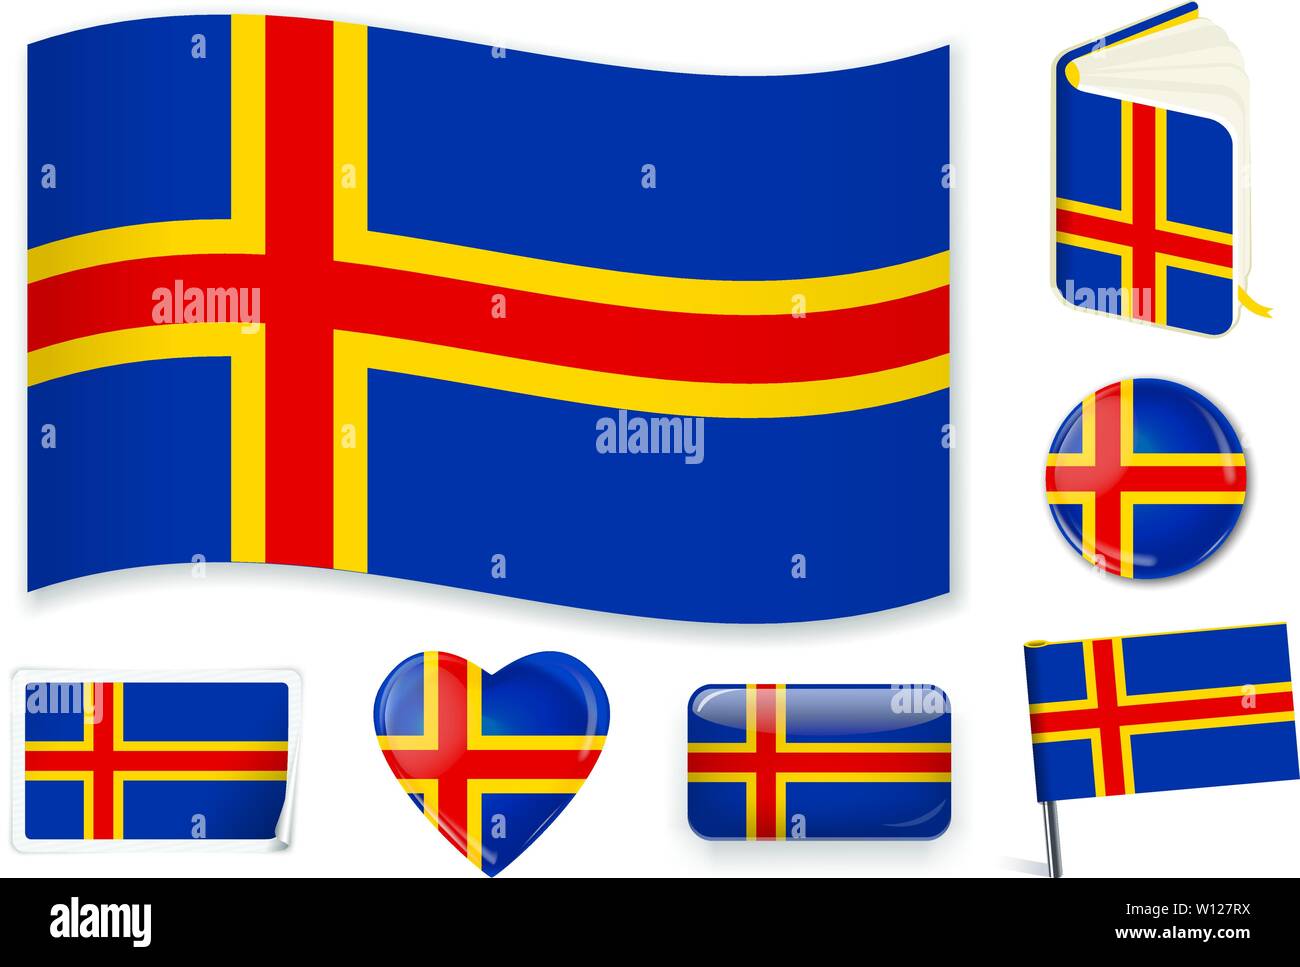 Aland Flag High Resolution Stock Photography And Images Alamy